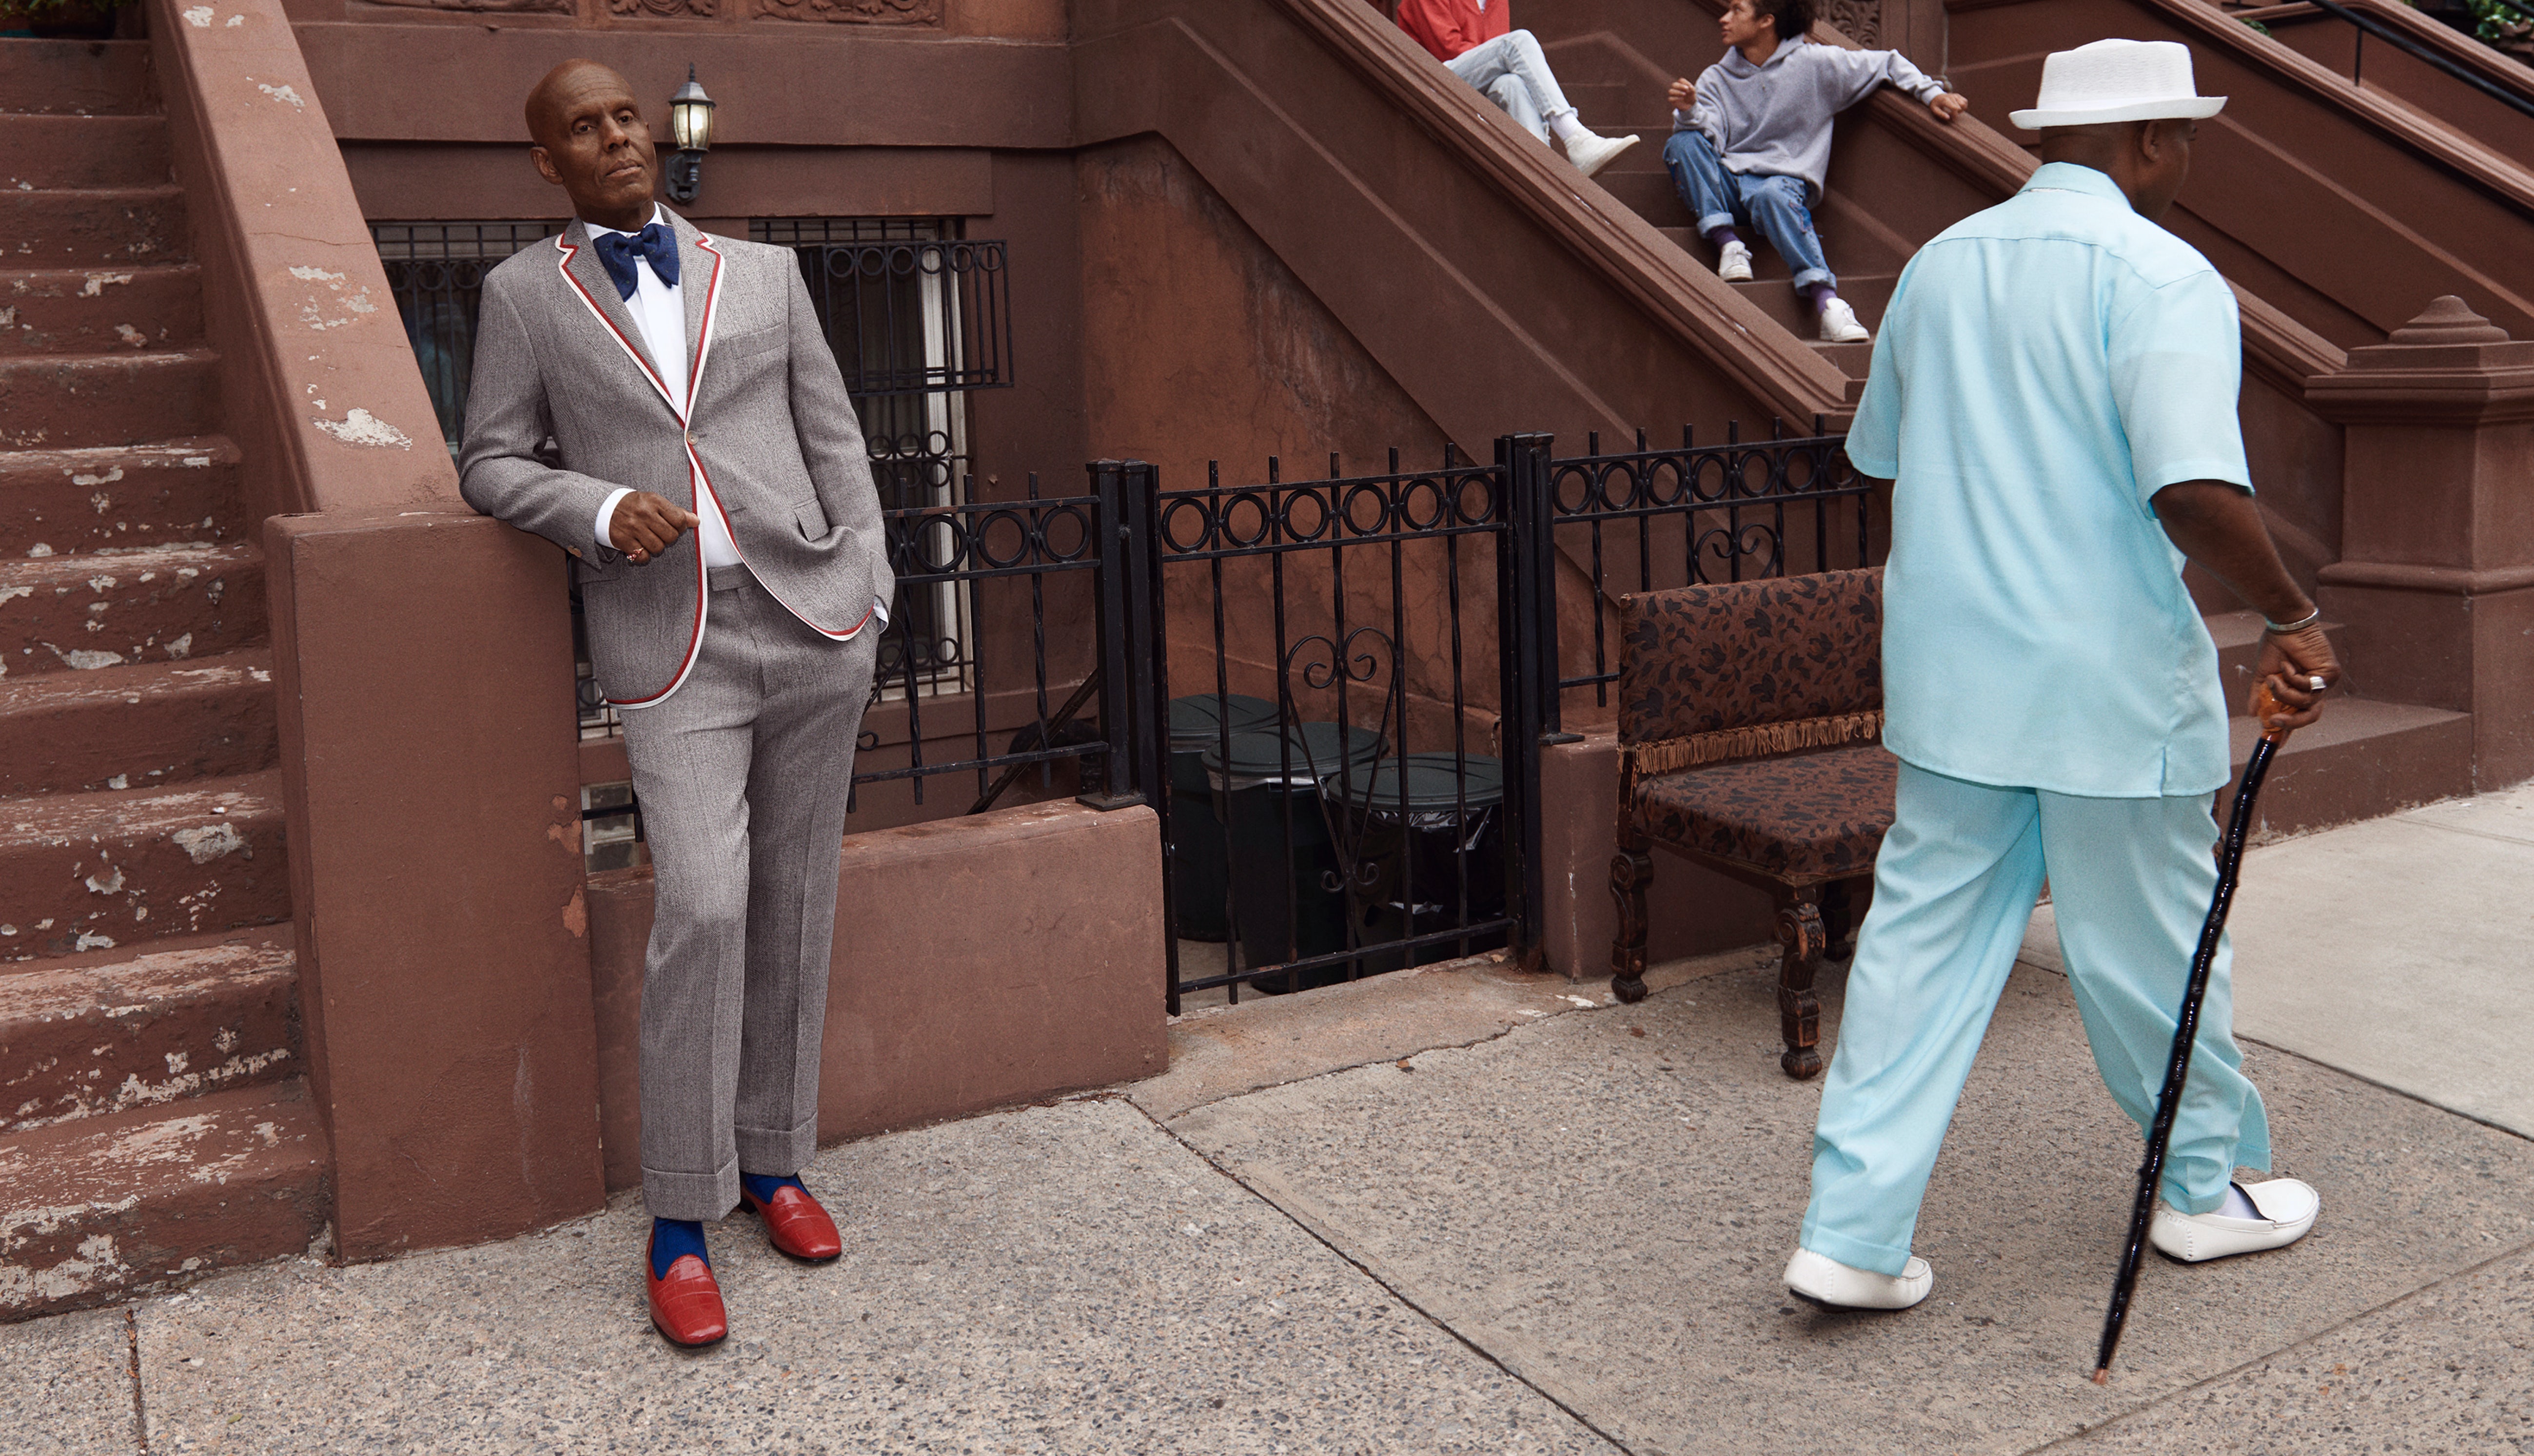 Dapper Dan Used to Knock Off Gucci. Now, He's Collaborating With